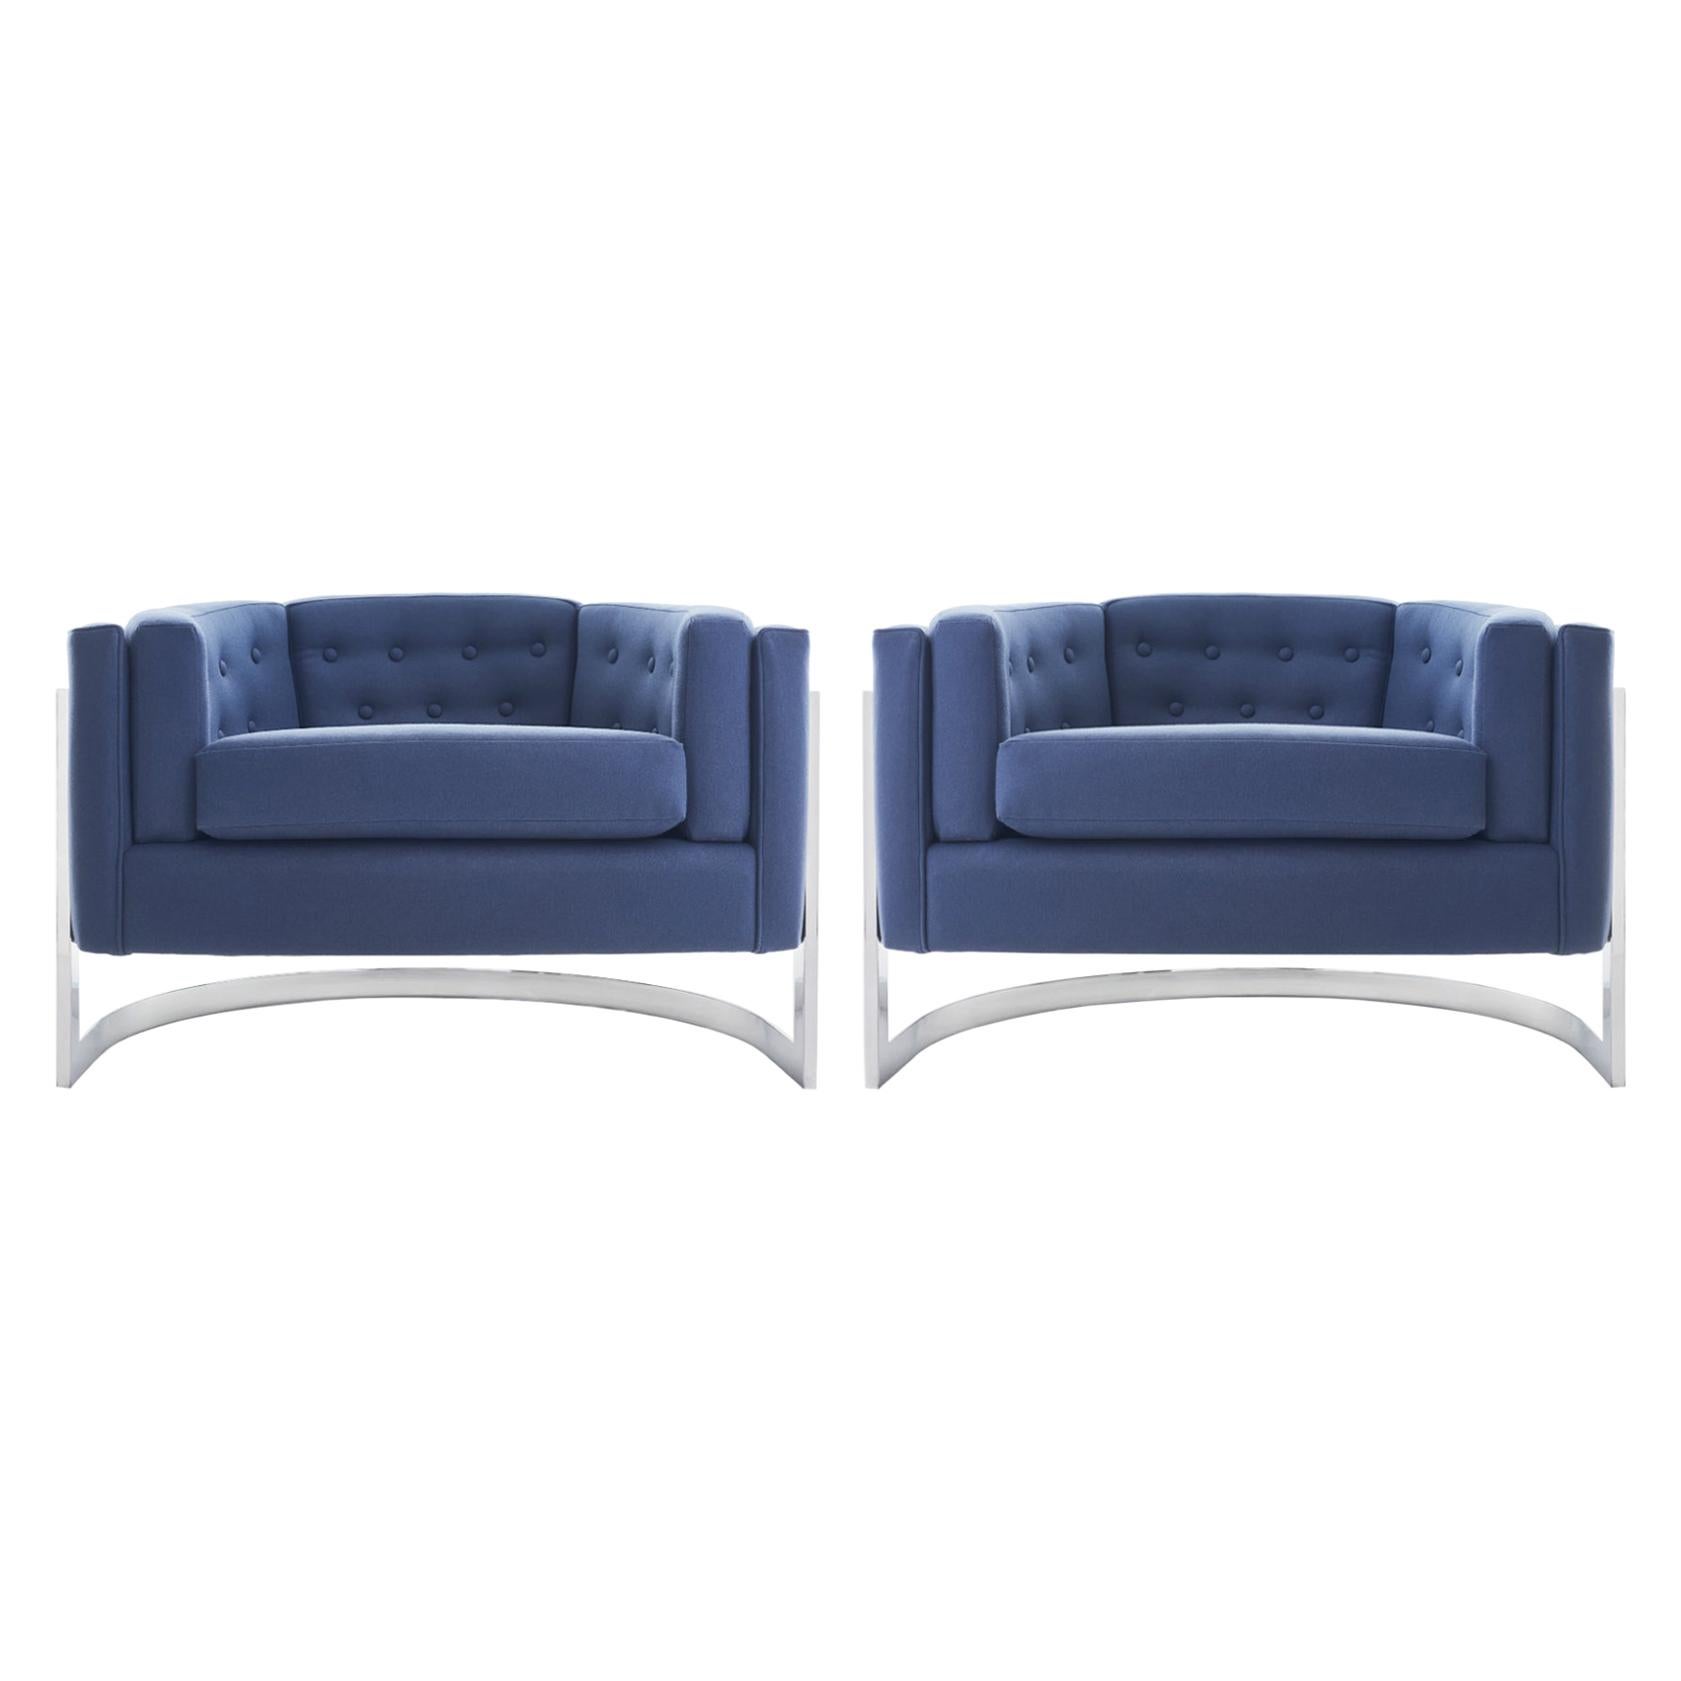 Gorgeous pair midcentury cantilever lounge chairs by Jules Heumann for Metropolitan Furniture, circa 1970. Newly upholstered in a soft blue wool, with high polish chrome base. 

Measures: 25